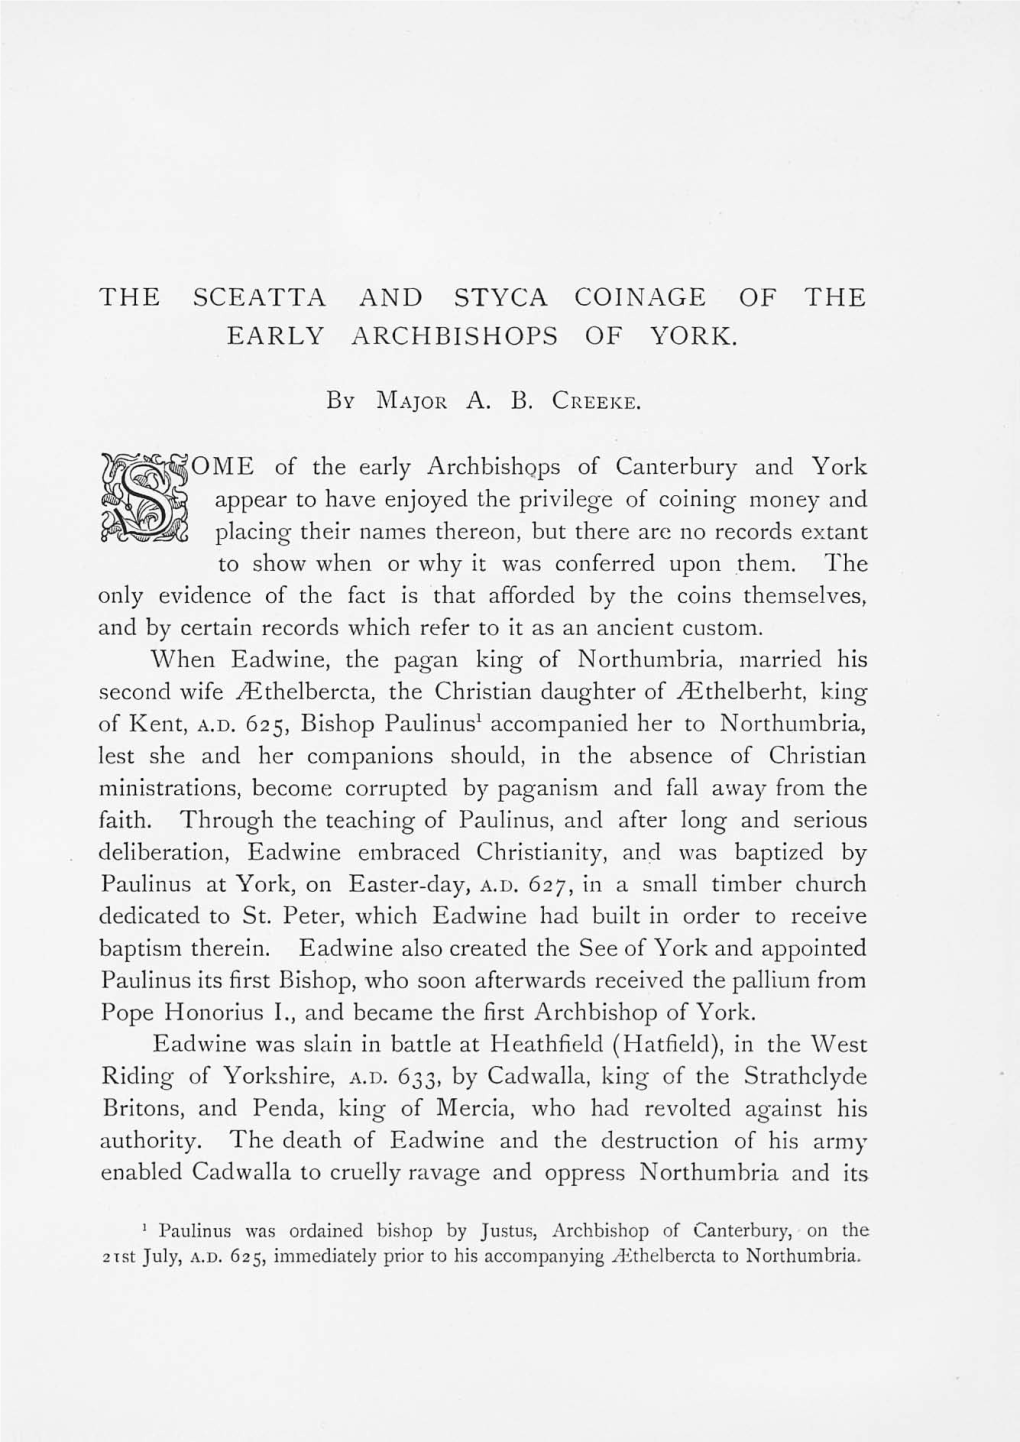 The Sceatta and Styca Coinage of the Early Archbishops of York